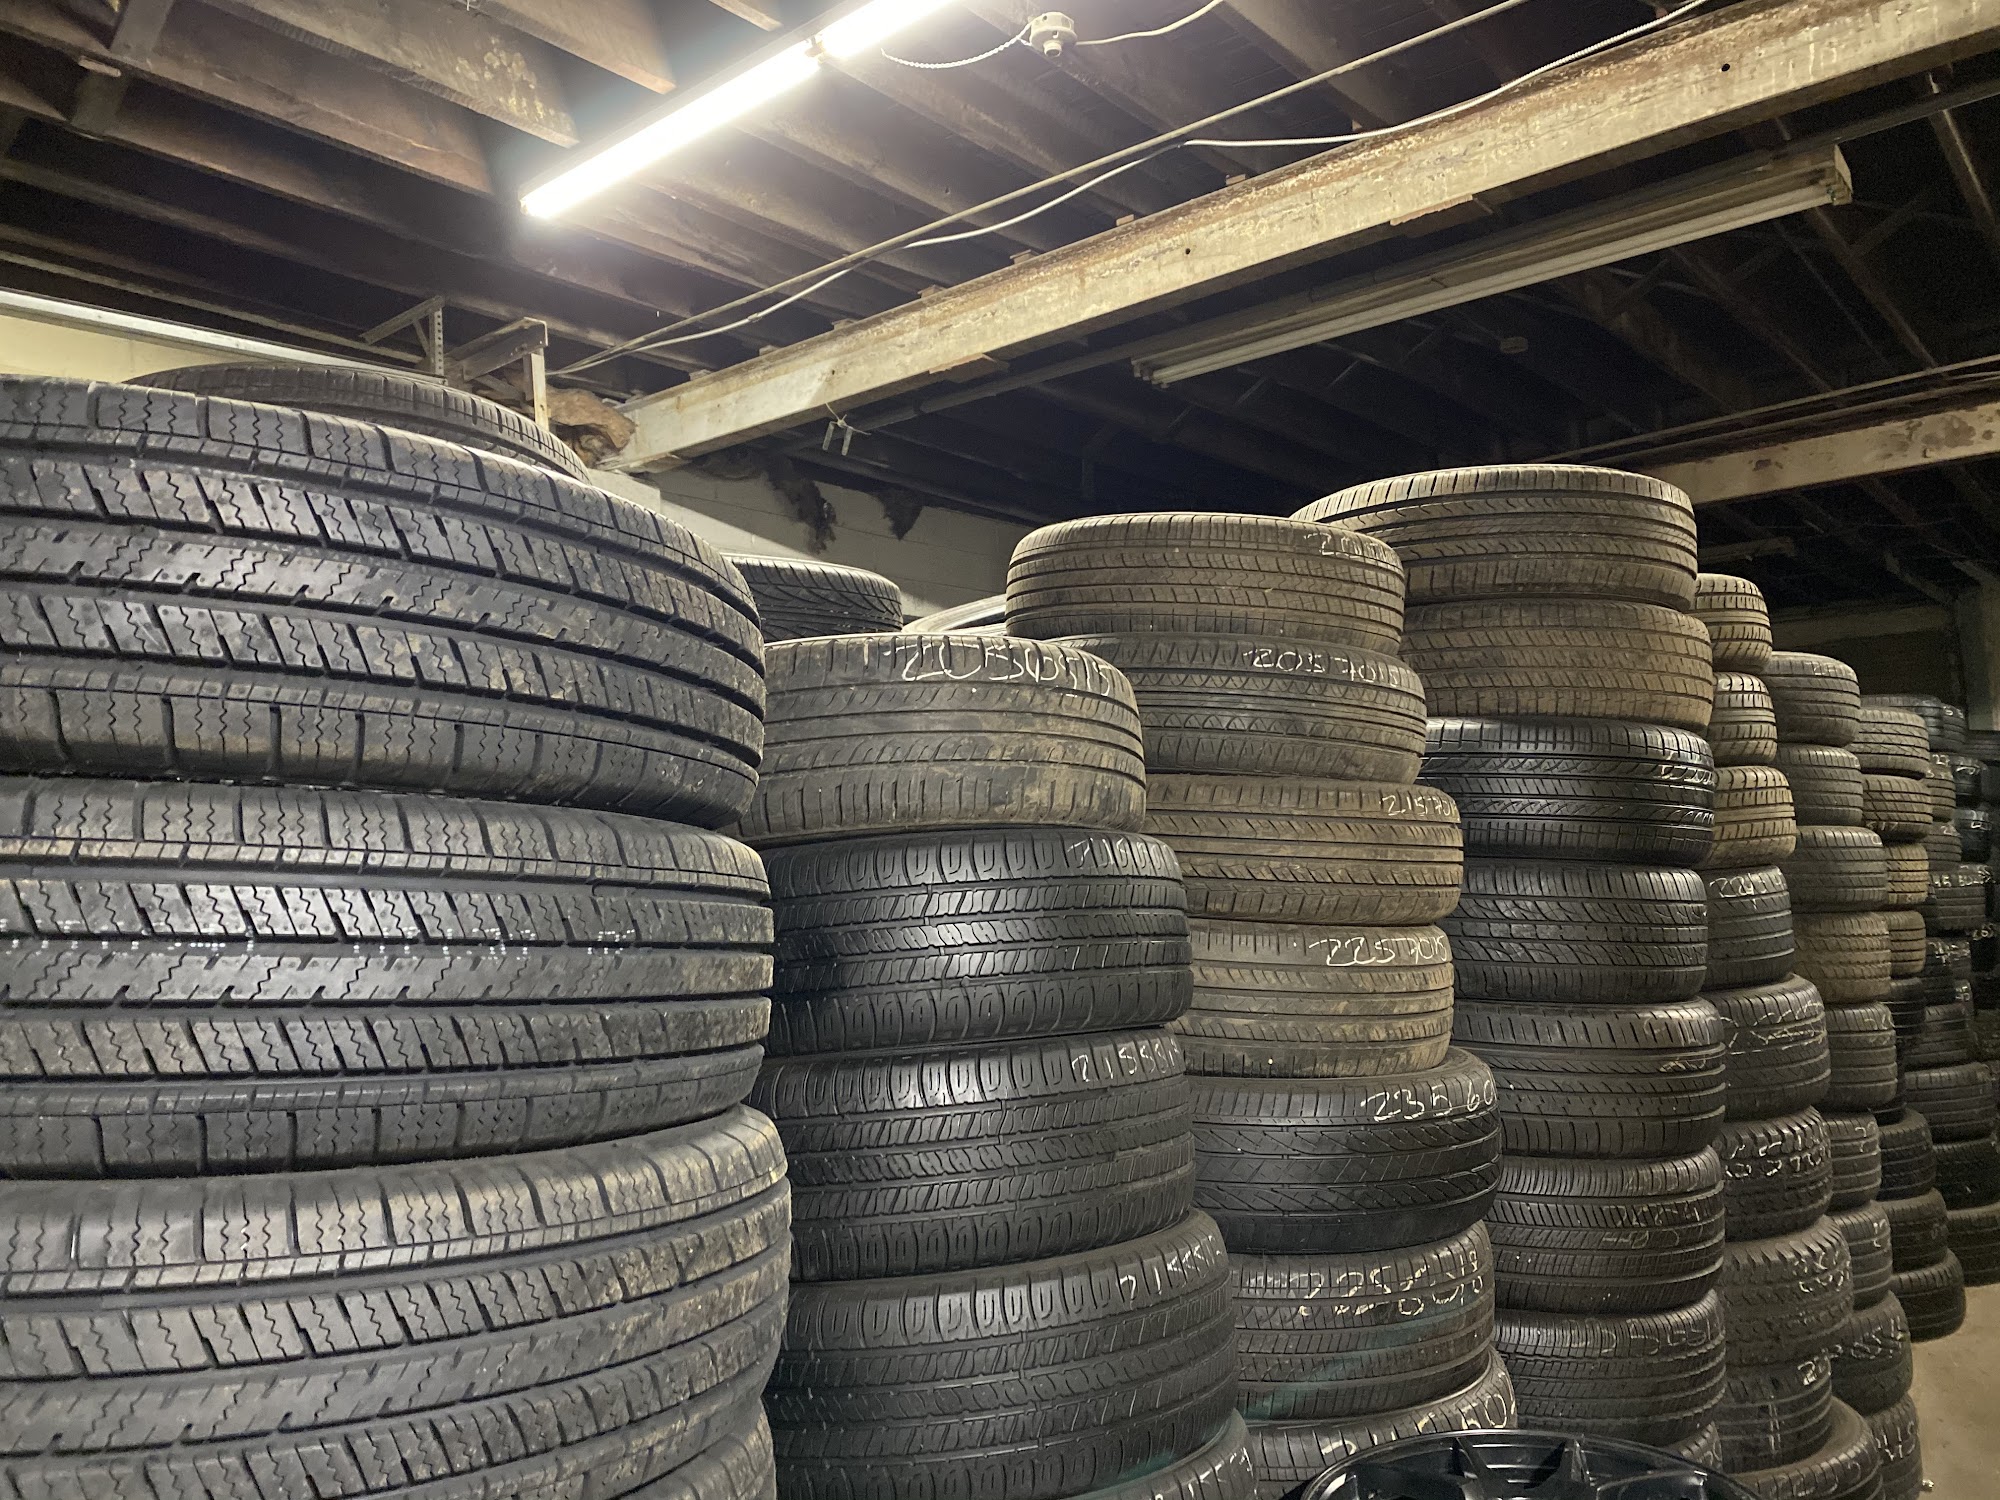 Select New & Used Tires And Auto Services